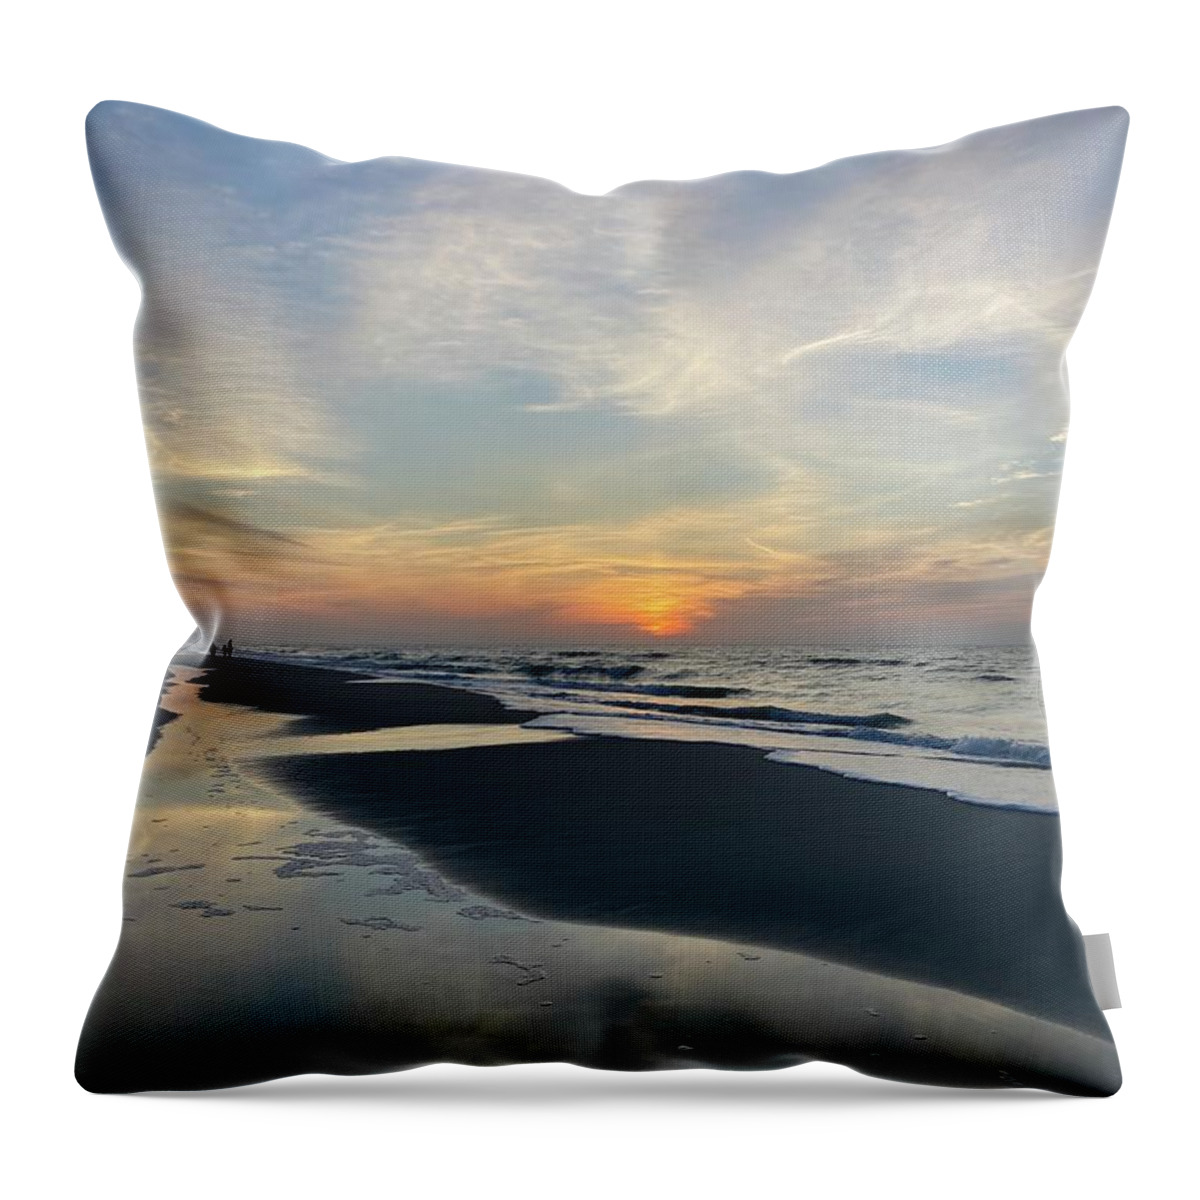  Throw Pillow featuring the photograph Beach11 by Mary Kobet